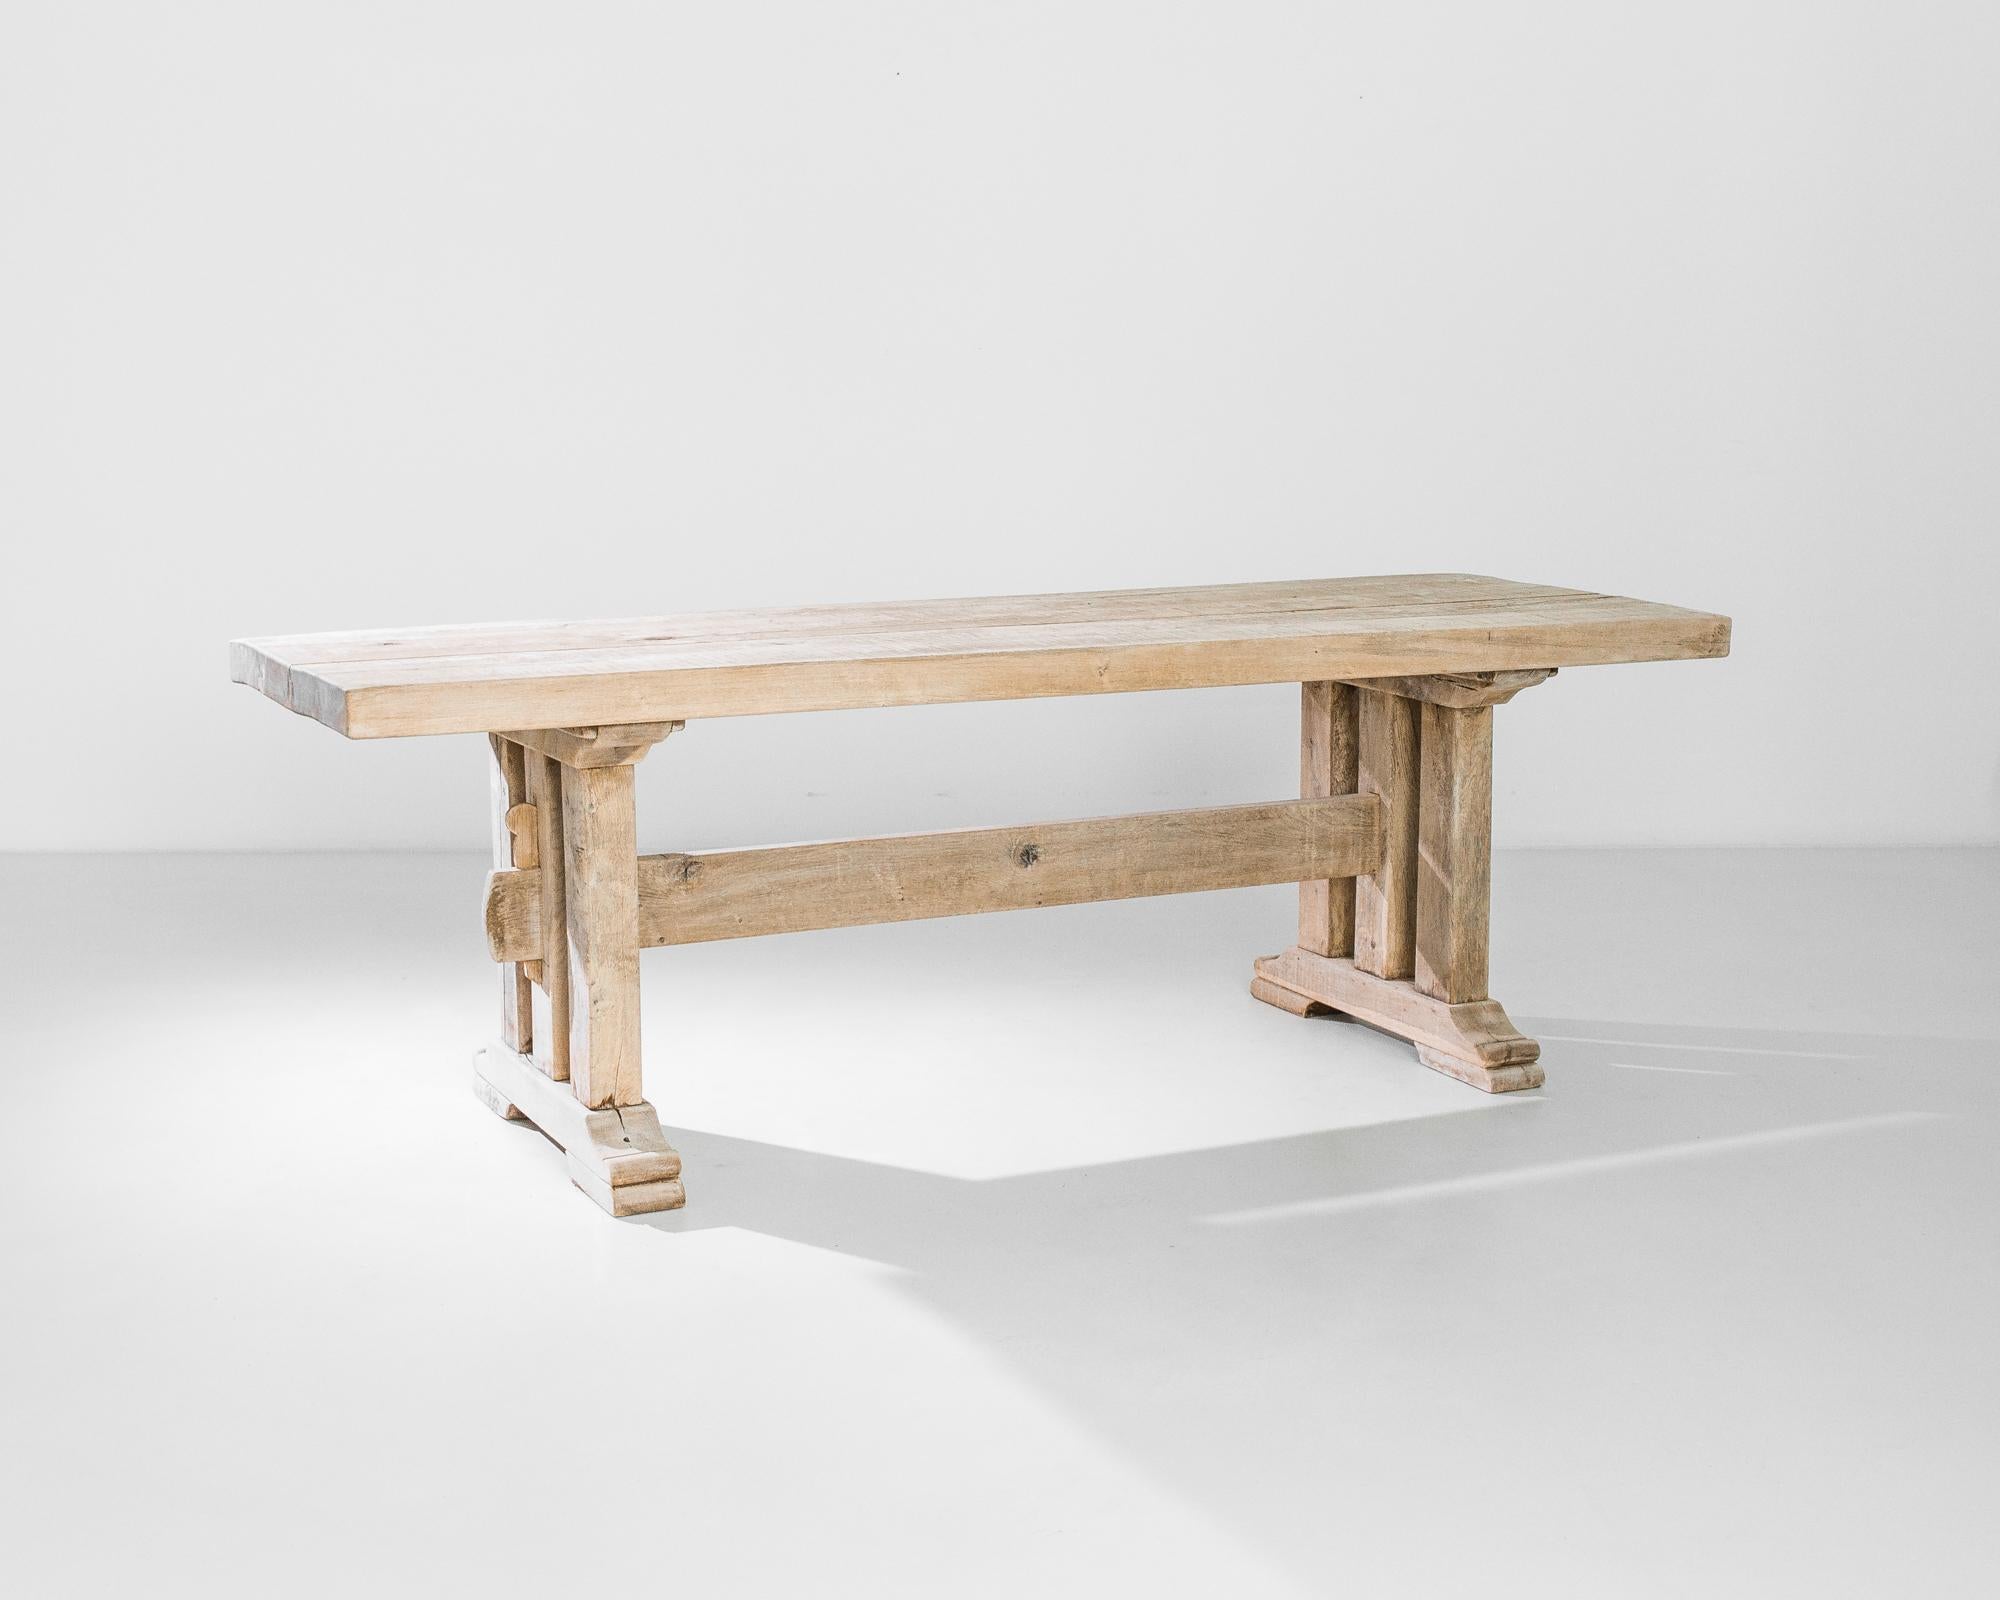 An oak dining table from 1960s Belgium with a handsome farmhouse silhouette. A long tabletop of wooden girders sits atop trestle legs, joined with a strut. The contours of the feet and pegs lend a shapely inflection to the sturdy form. The oak has